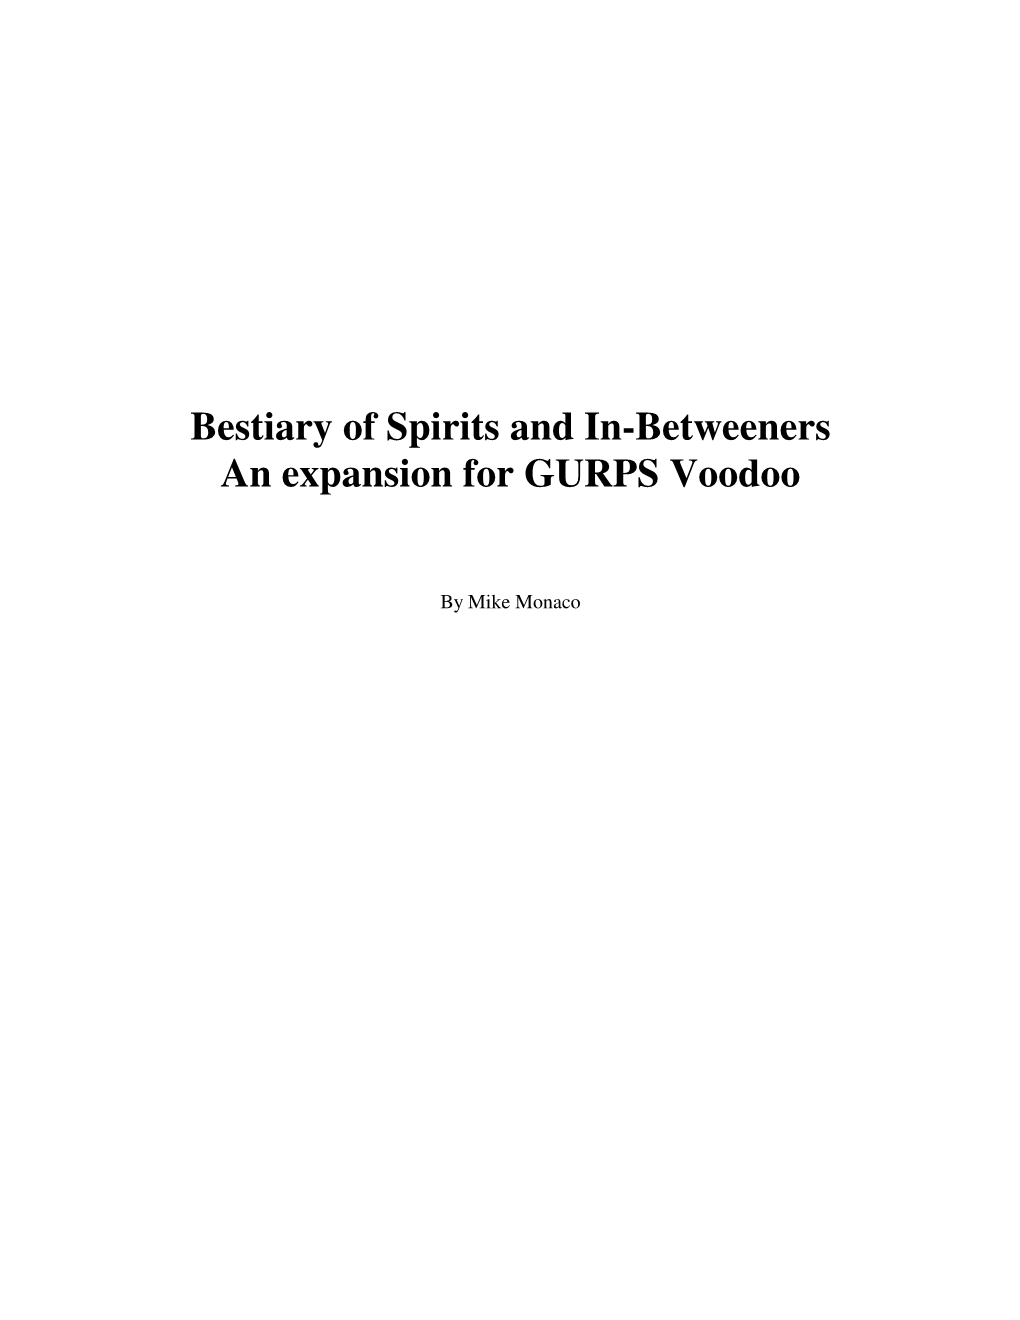 Bestiary of Spirits and In-Betweeners an Expansion for GURPS Voodoo